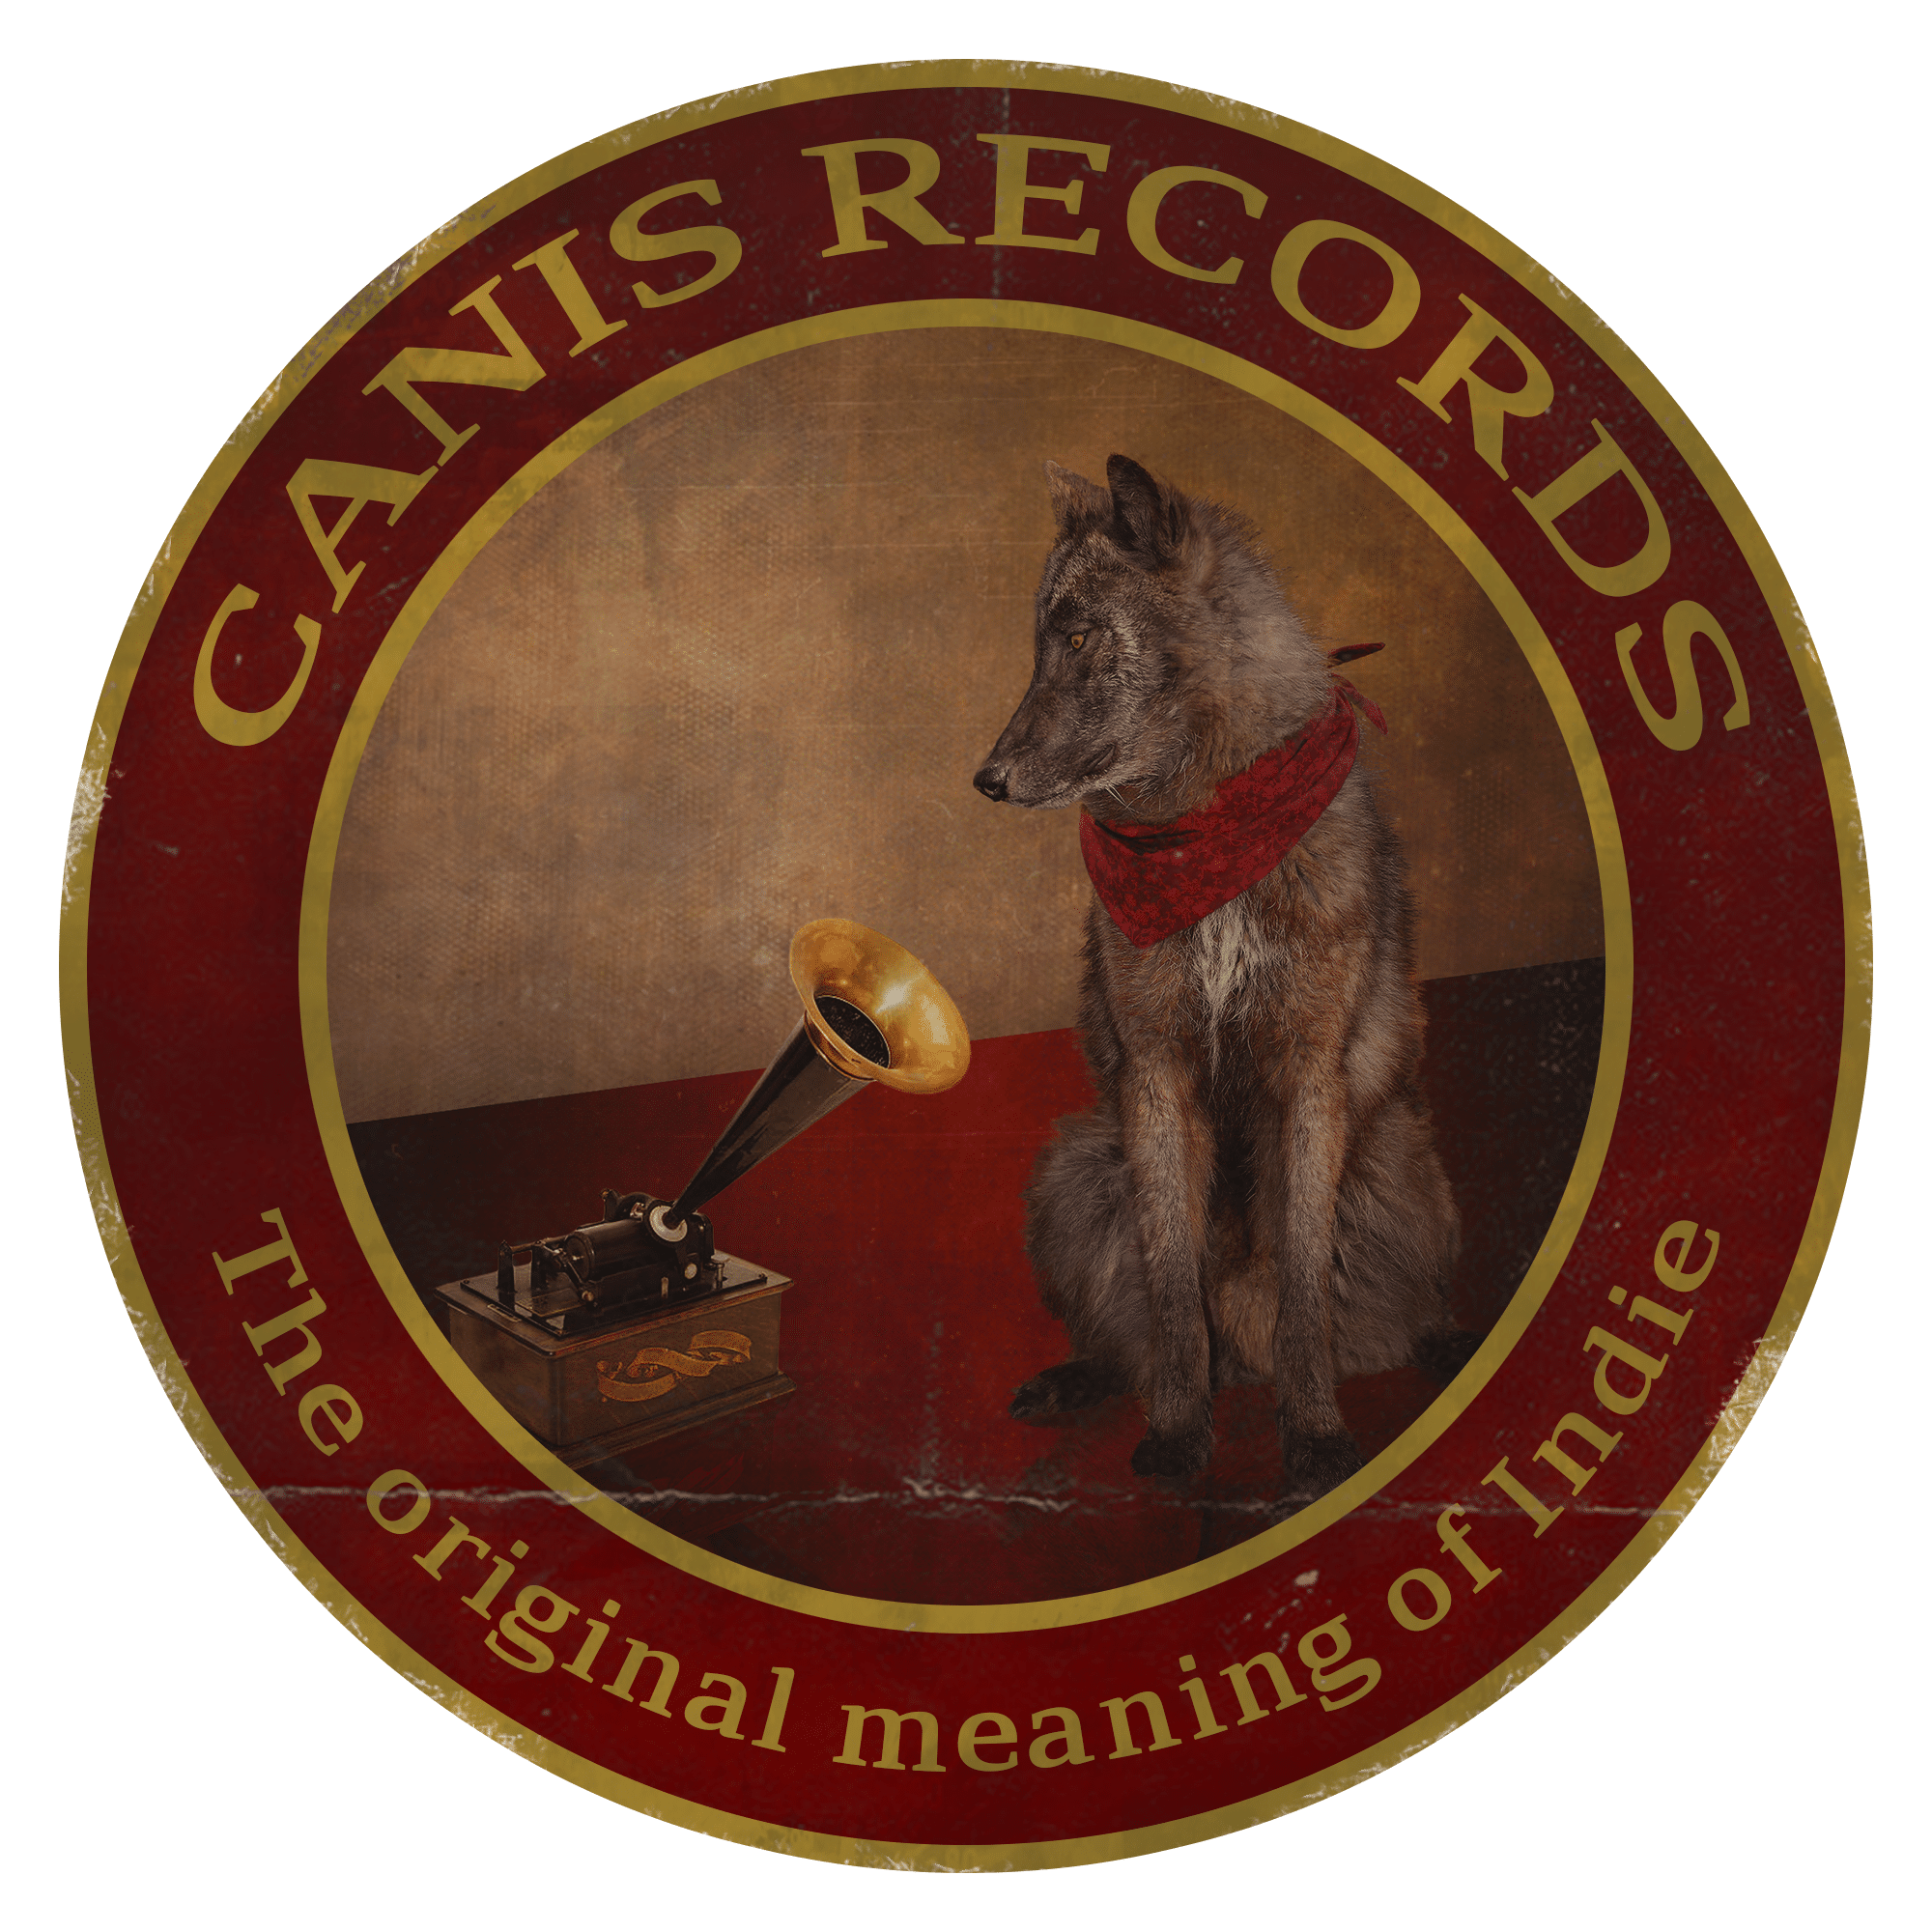 Canis_Records_Logo